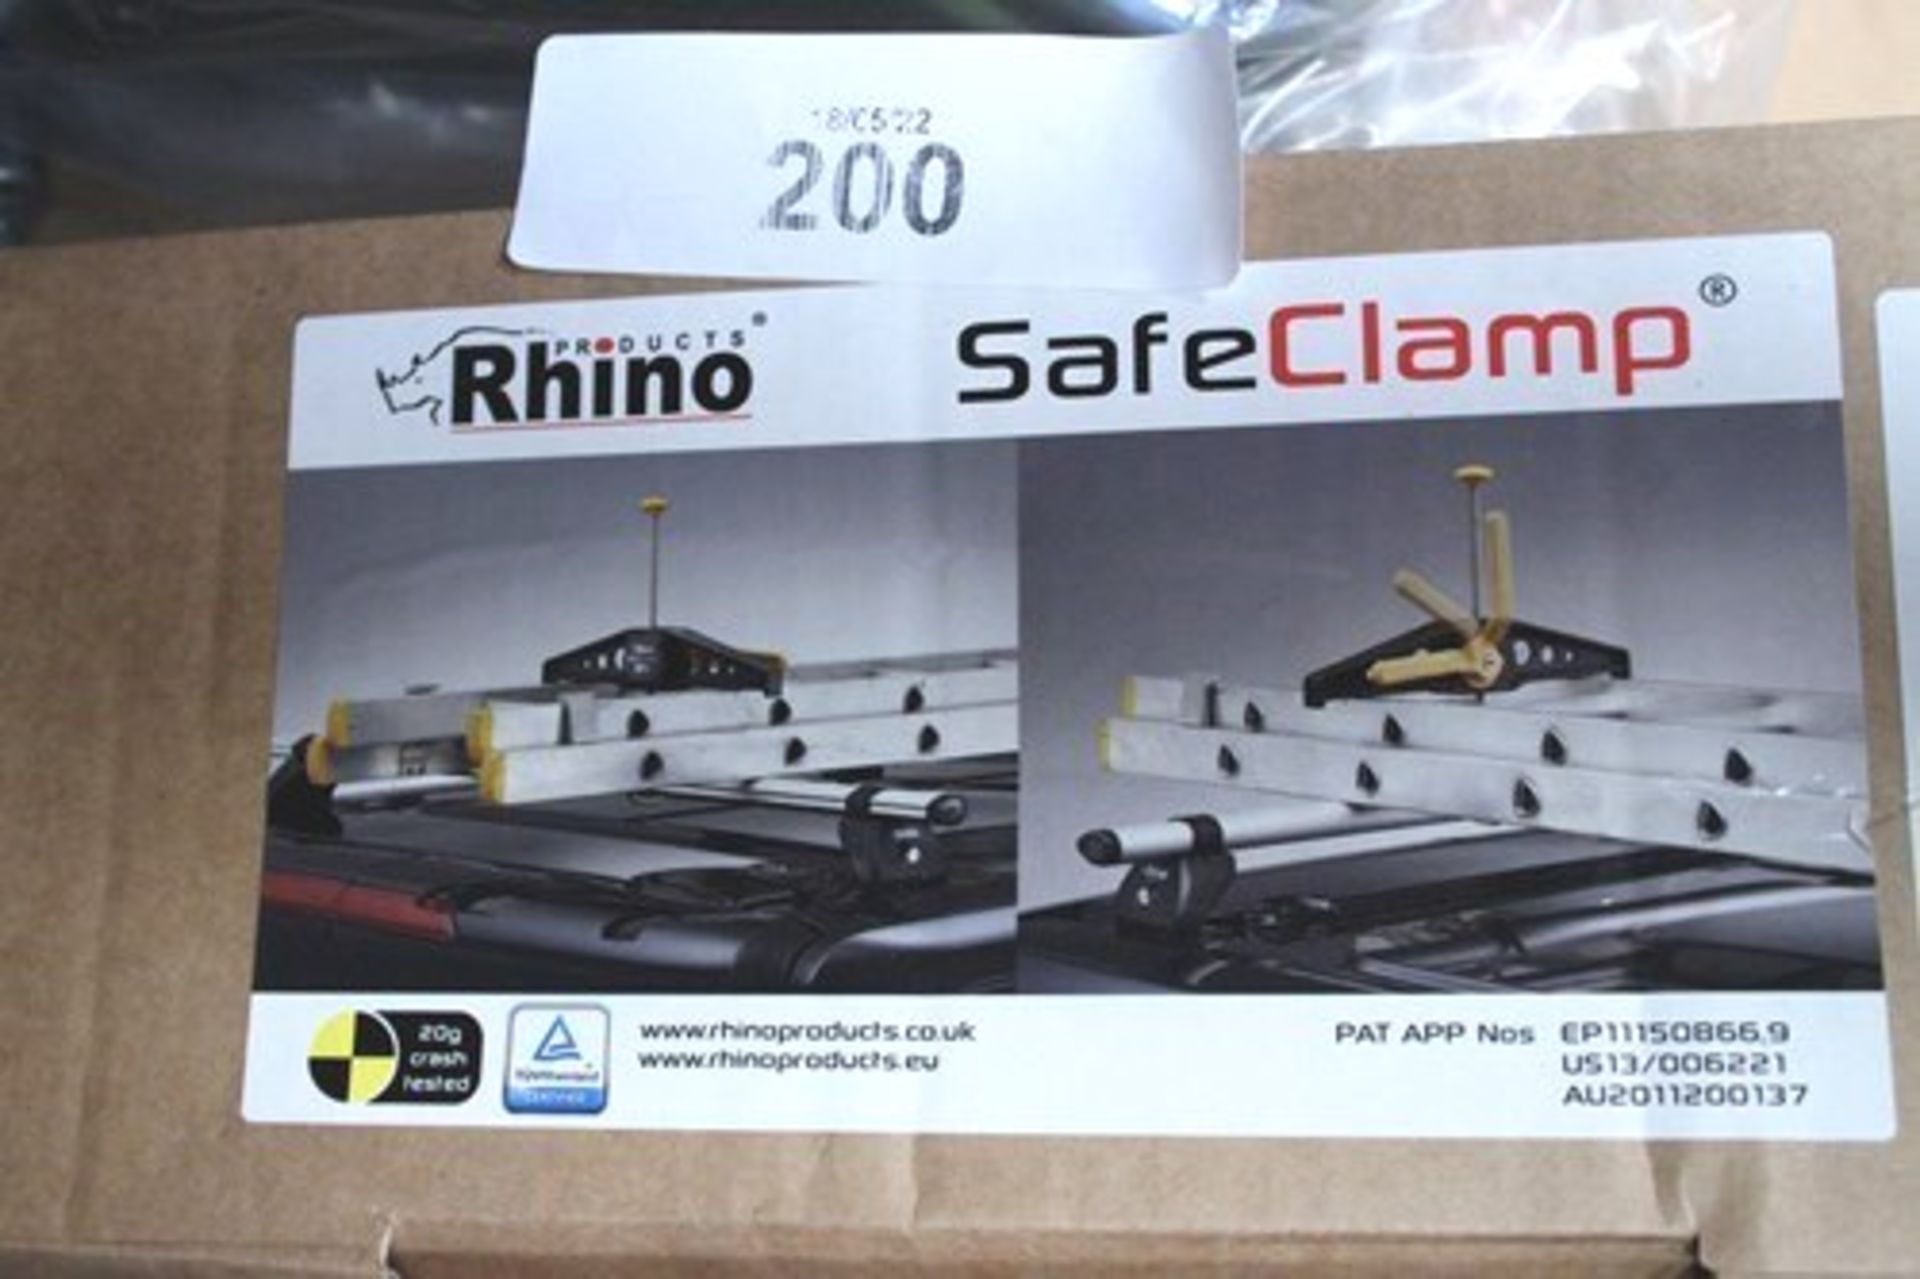 A pair of Rhino safe clamp ladder storage clamps, model RAS21 - New in box (GS14)